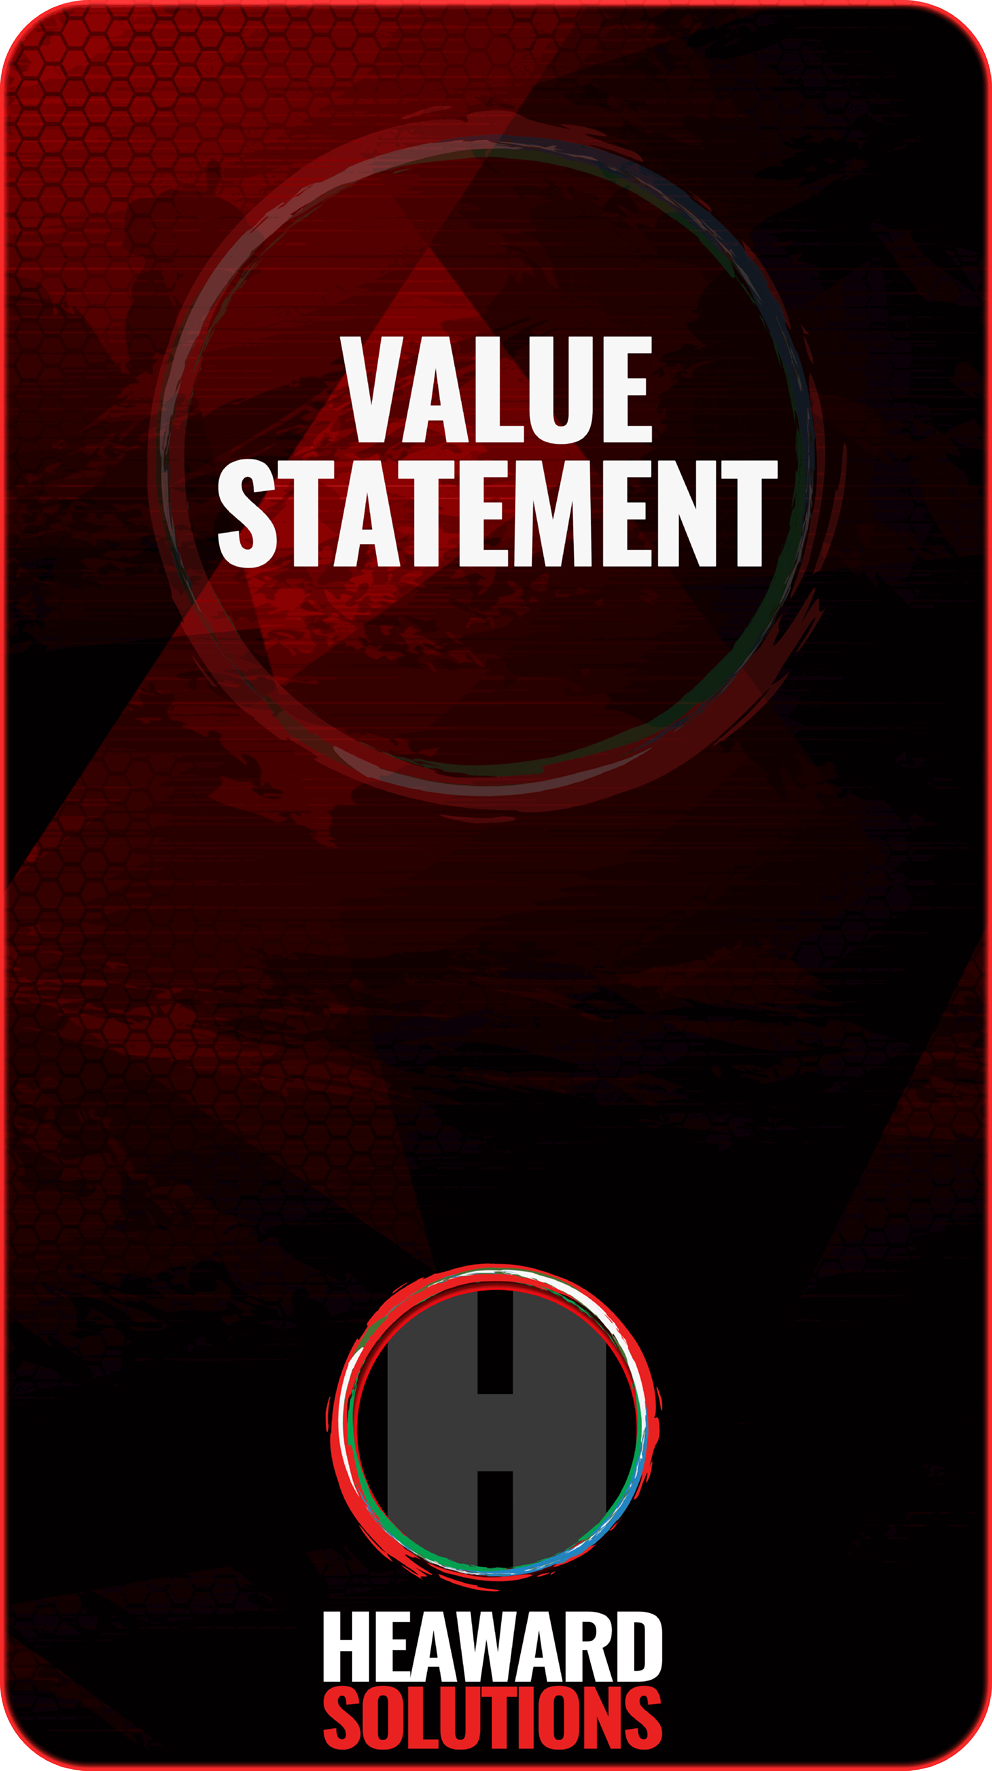 heaward solutions value statement front card image